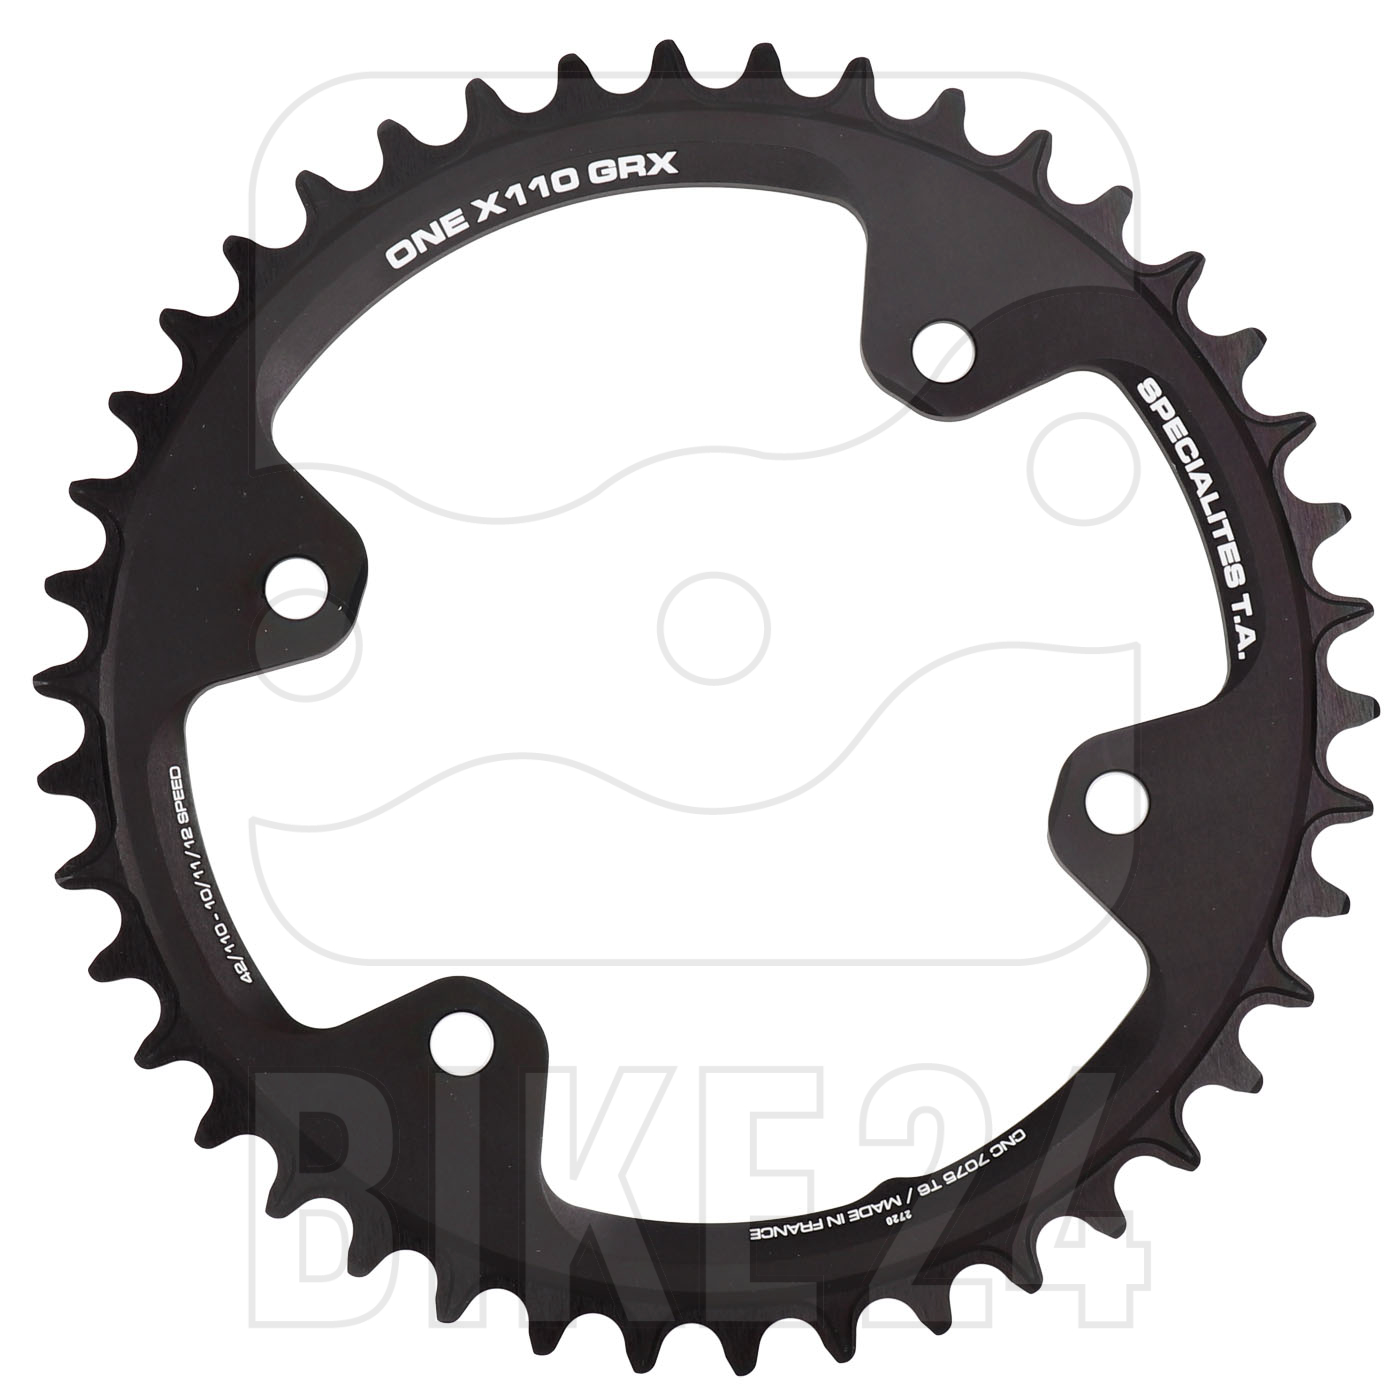 Productfoto van TA Specialites ONE X110 Chainring for Shimano GRX - 4-Arm - 110mm - black